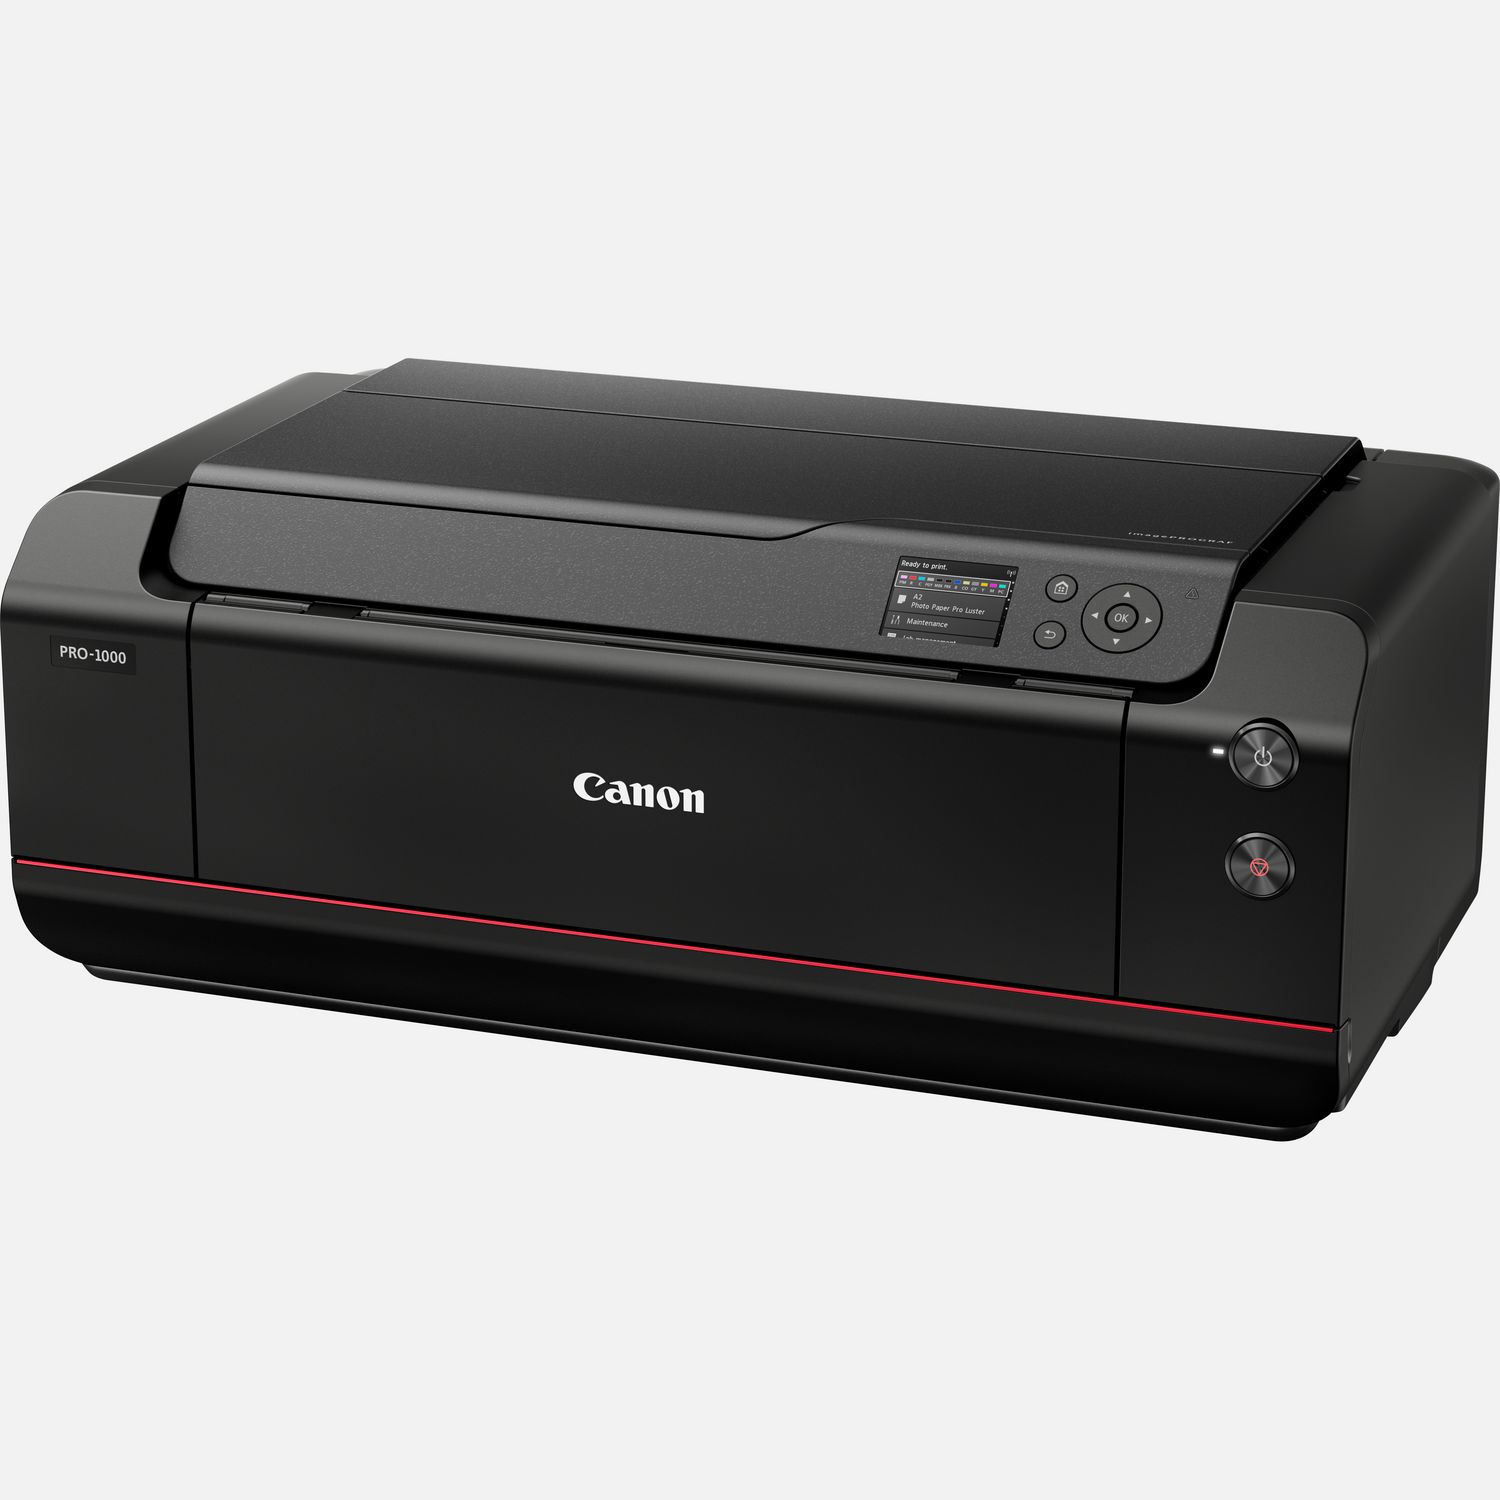 Buy Printers: Compare prices & features — Canon UK Store